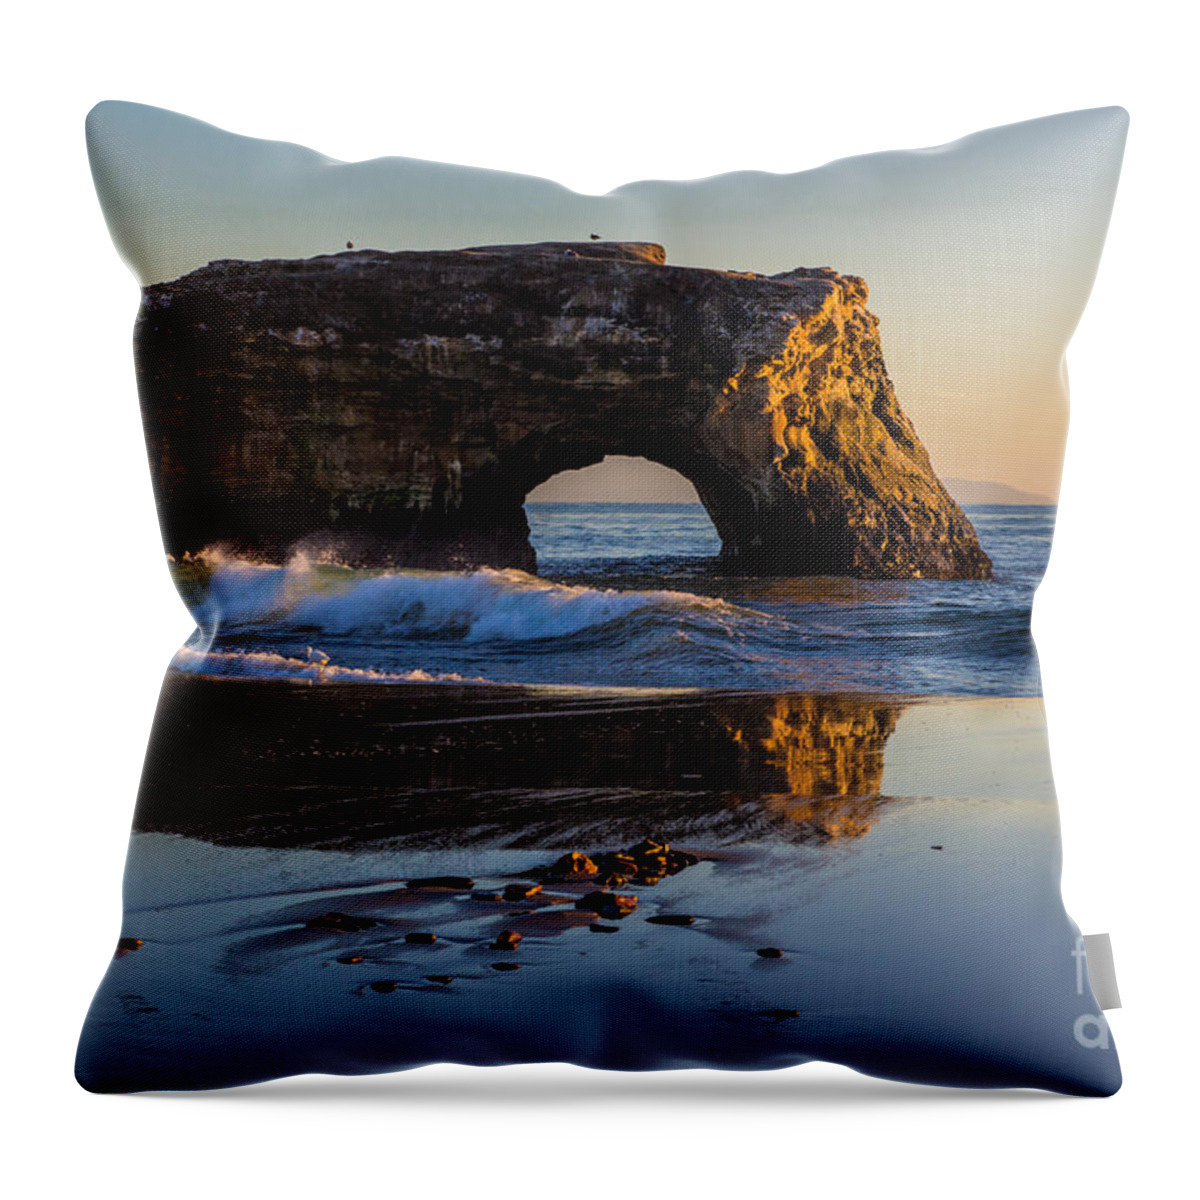 Natural Bridges State Beach Throw Pillow featuring the photograph Natural Bridge by Suzanne Luft